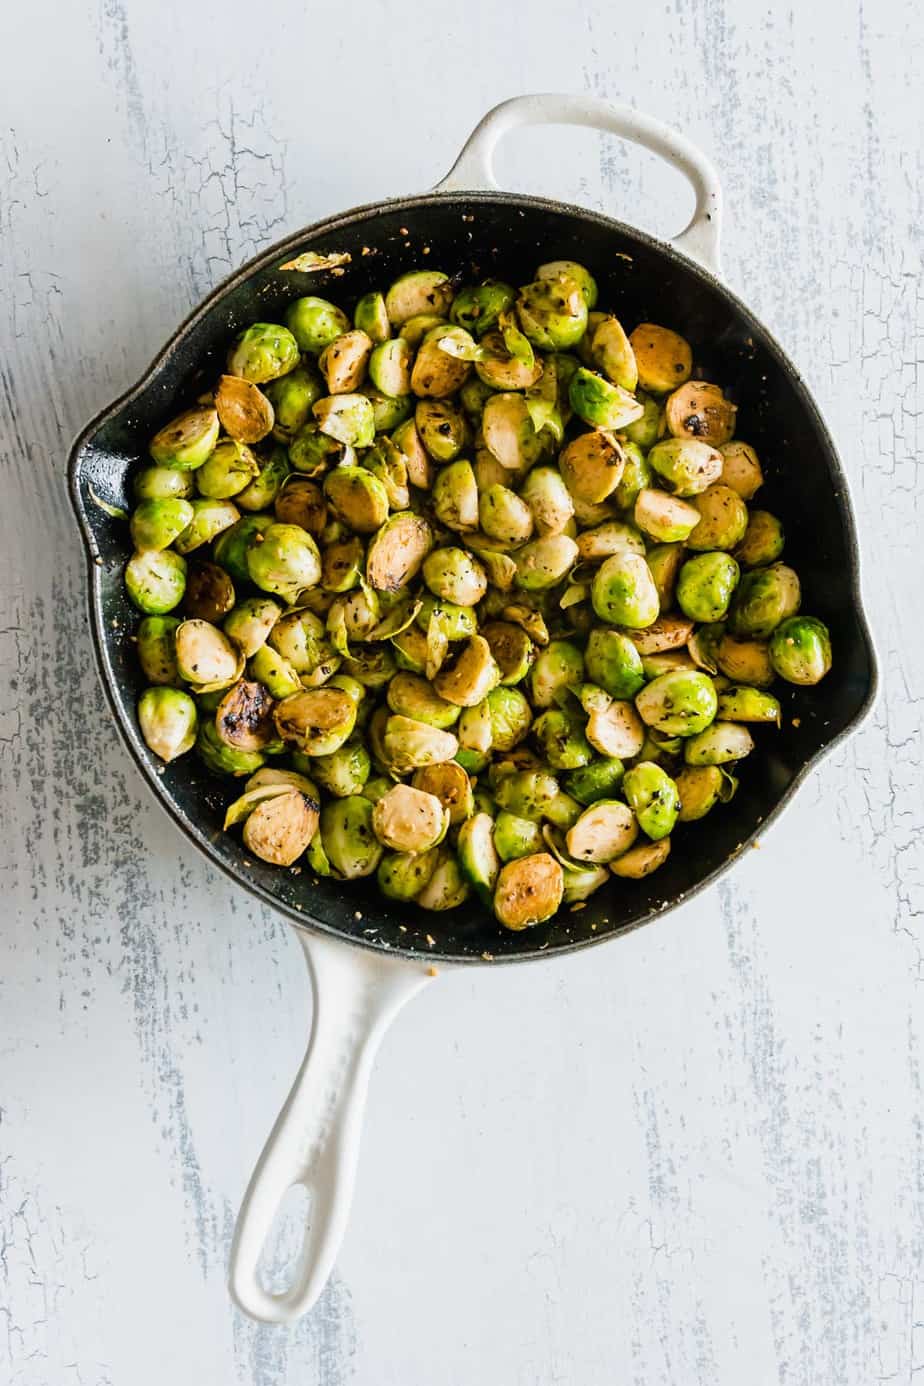 Cooked Brussels sprouts in a skillet.